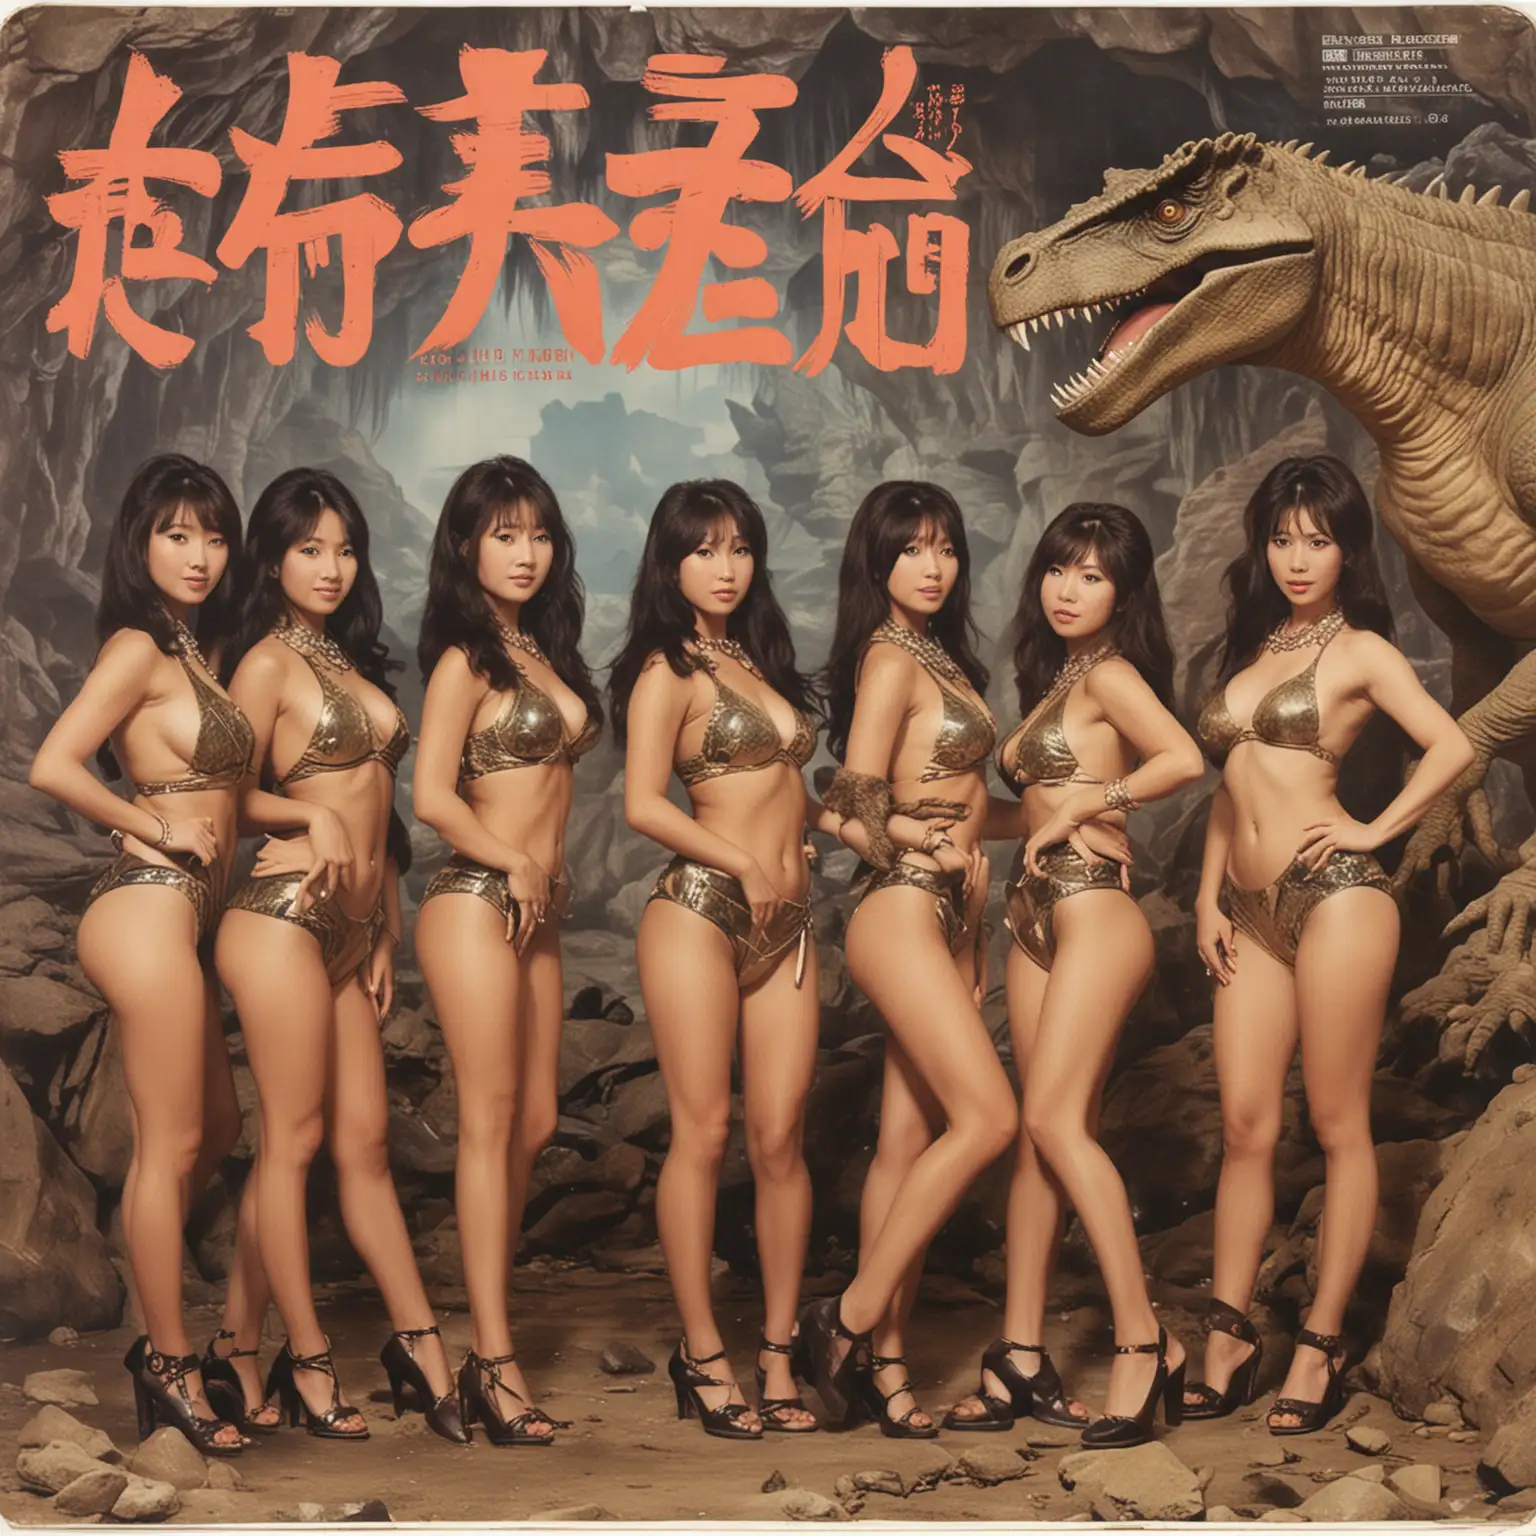 record sleeve for japanese girl group called “Idol Wild”, with photo of oriental cave girls fighting a fake-looking dinosaur, women wearing skimpy furs in the style of ‘One Million Years bc”. record designed with printed titles and company marks and patina slightly worn